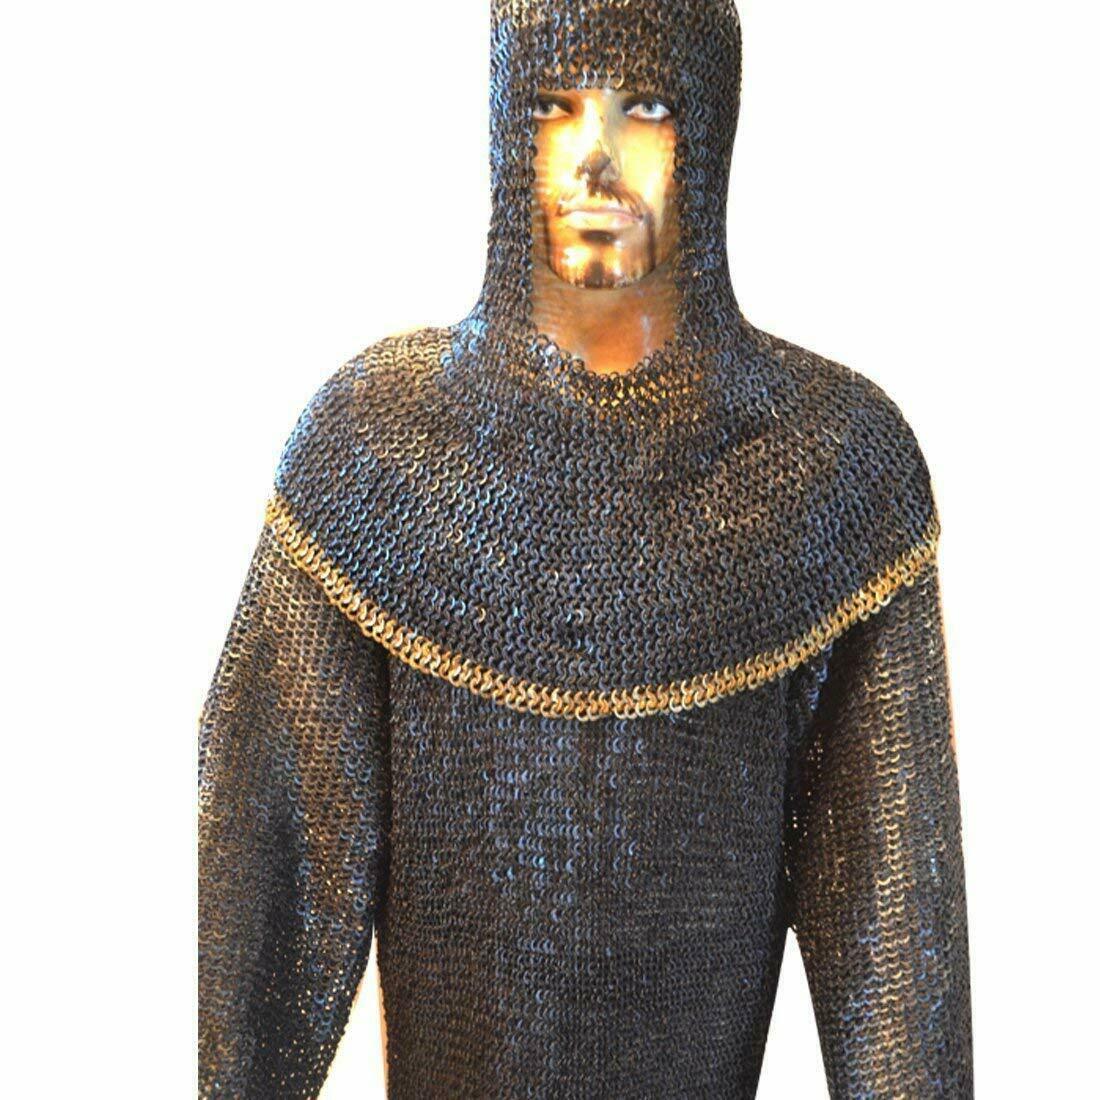 Souvenir India Chainmail Hood/Coif 9 mm Flat Riveted MS Medieval Armor 